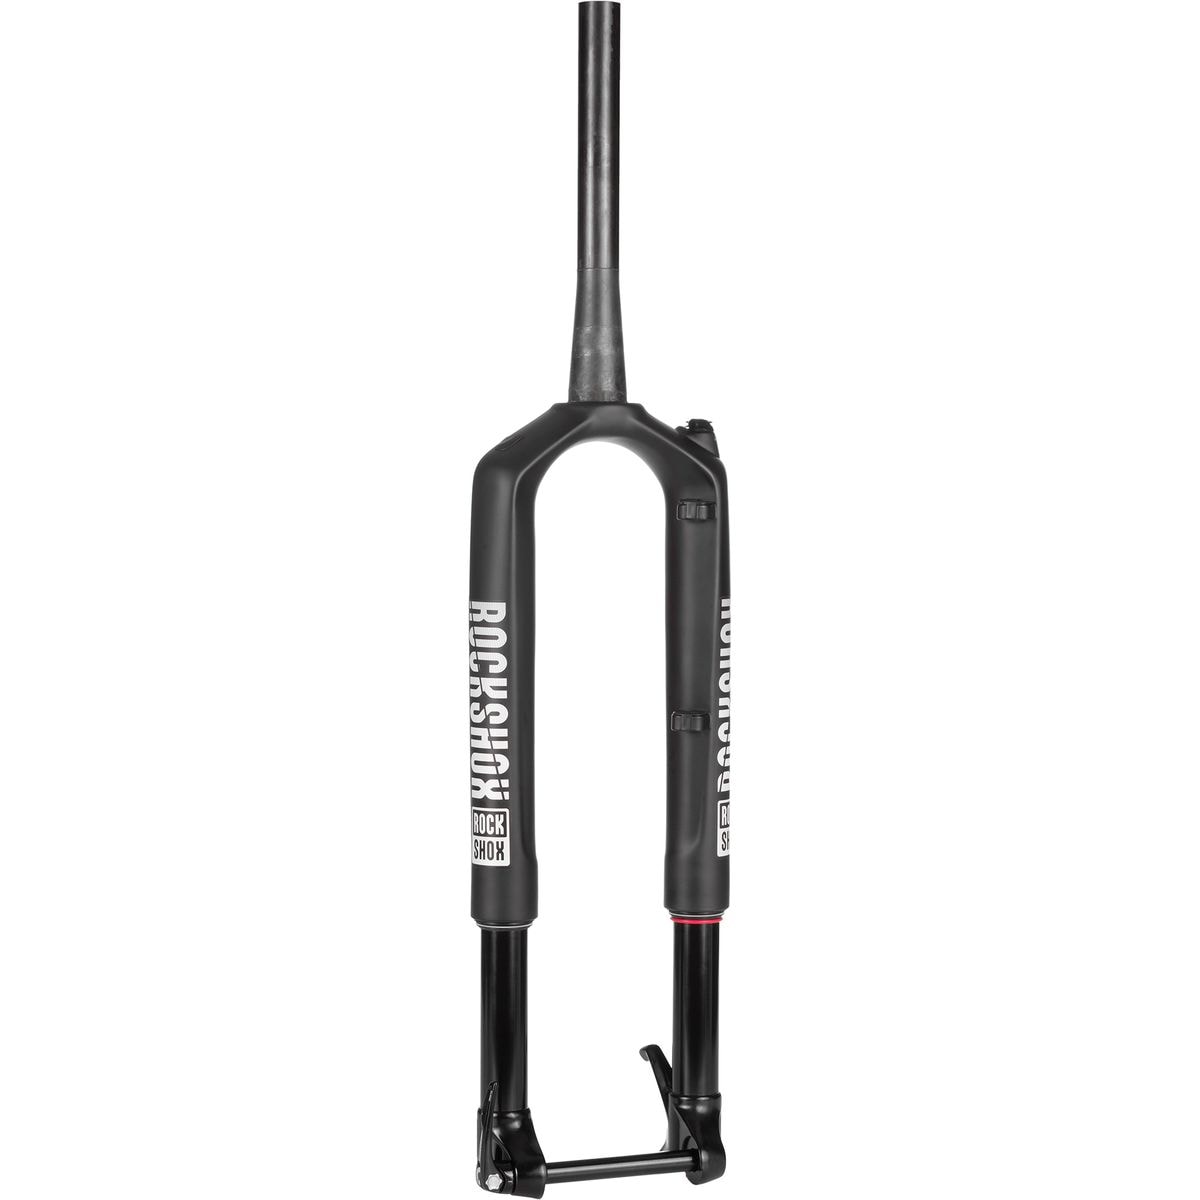 RockShox RS-1 RL Solo Air 120 Fork w/ Remote - 27.5in - 2018